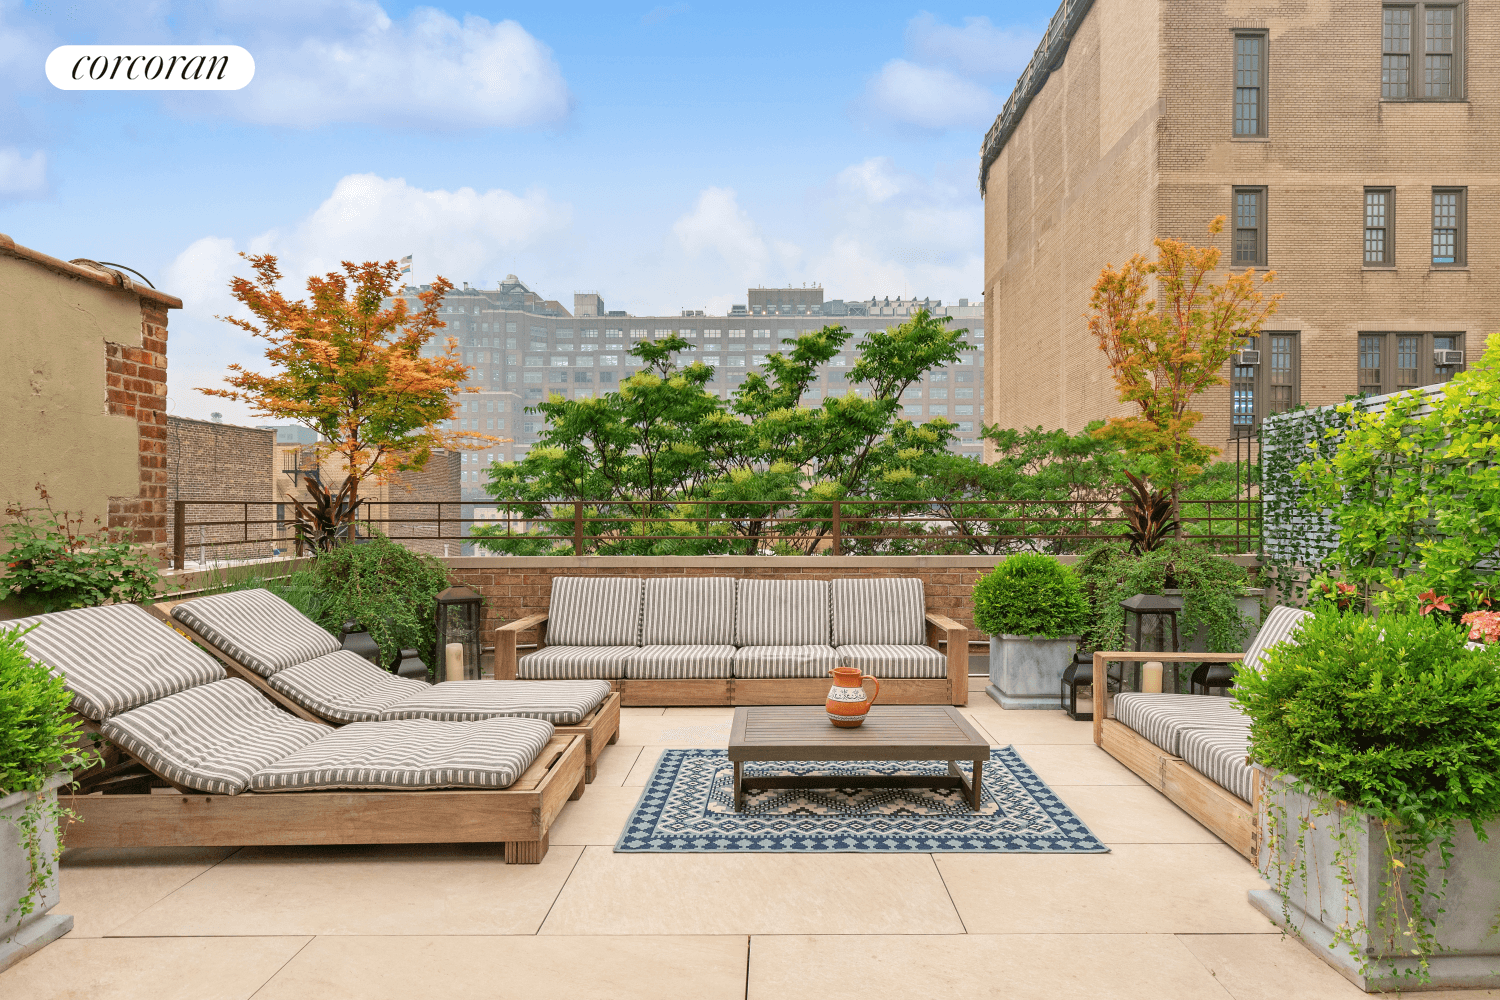 Experience a tranquil and luxurious lifestyle in this Penthouse duplex, boasting 2 bedrooms, 2 bathrooms, and a sprawling private outdoor space.